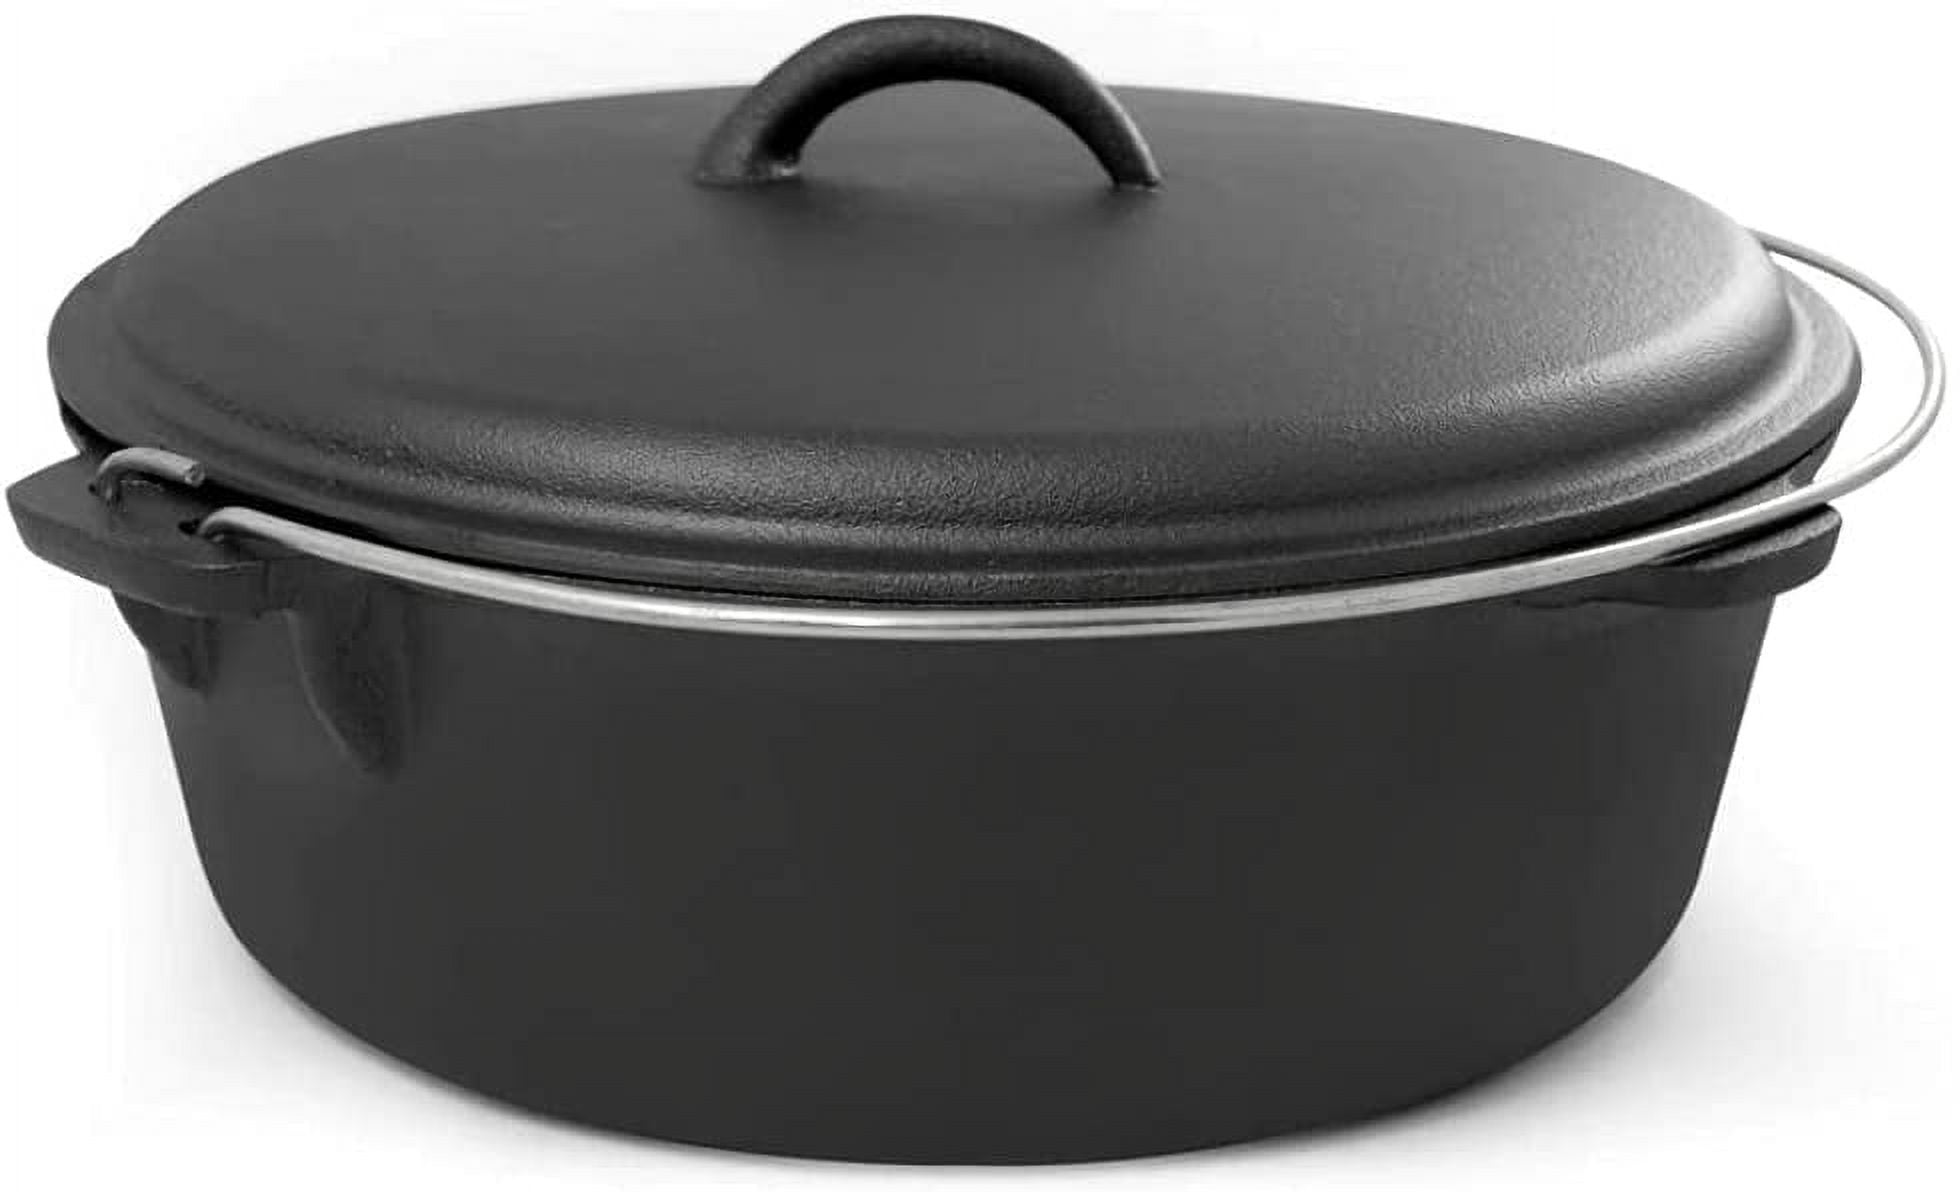  Cast Iron Pot with Lid, Black Round Casserole Dishes Sturdy Dutch  Oven with Ergonomic Dual Handles Deep Crock Pots for Braising(20CM): Home &  Kitchen